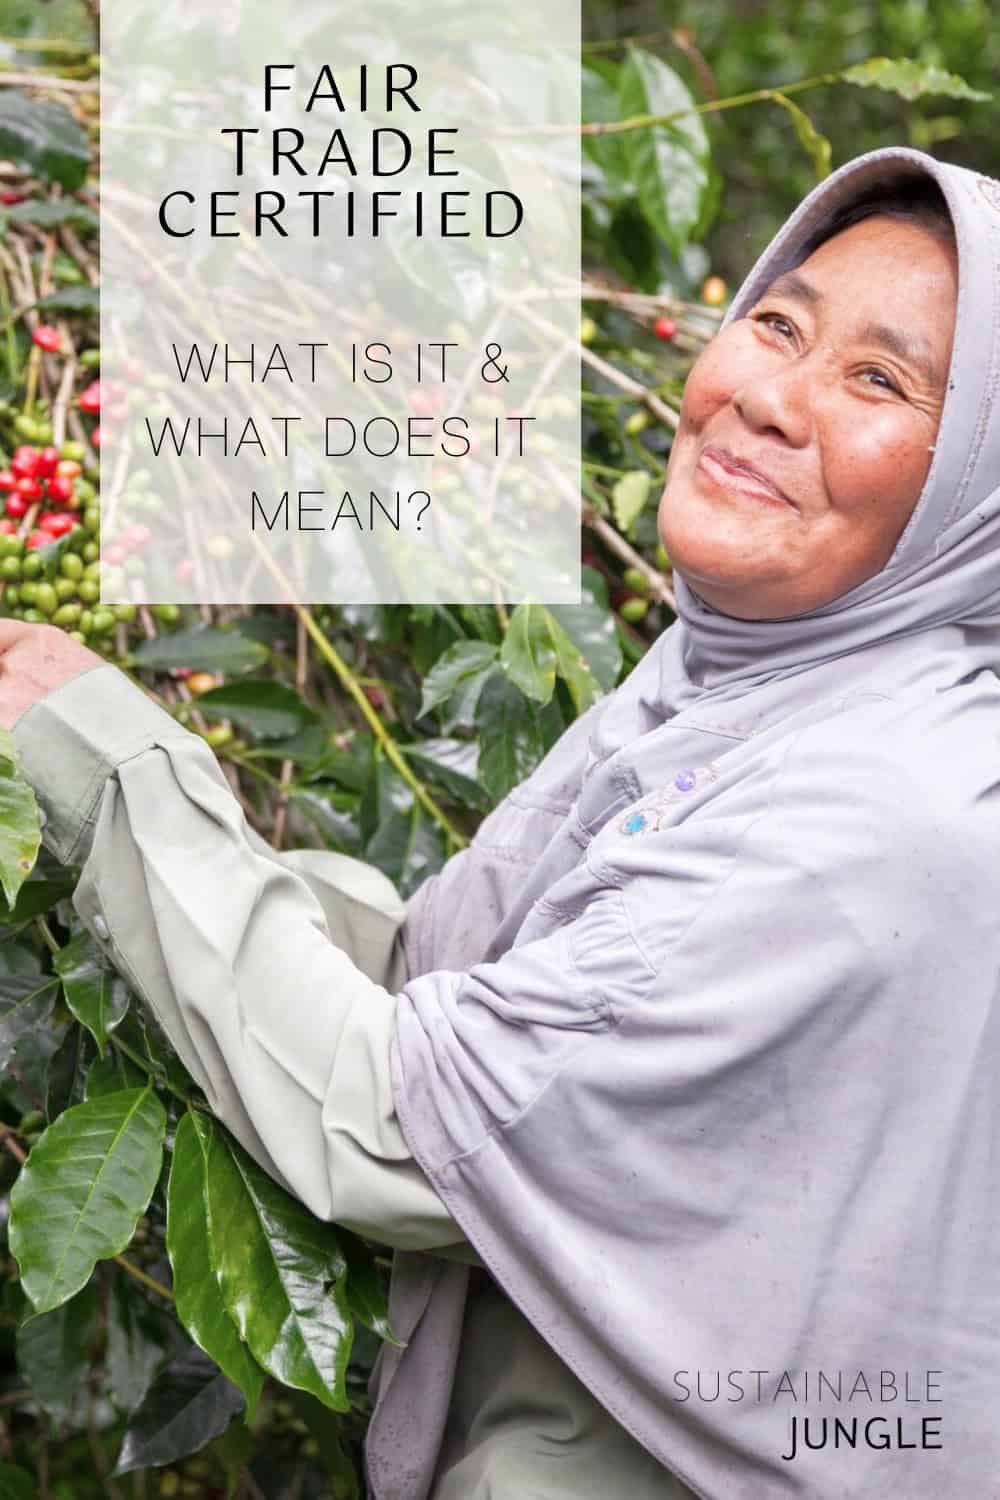 What Is Fair Trade? Image by Fair Trade USA #whatisfairtrade #whatdoesfairtrademean #fairtradecertified #fairtradedefinition #fairtradeethids #fairtradecertifiedmeaning #sustainablejungle